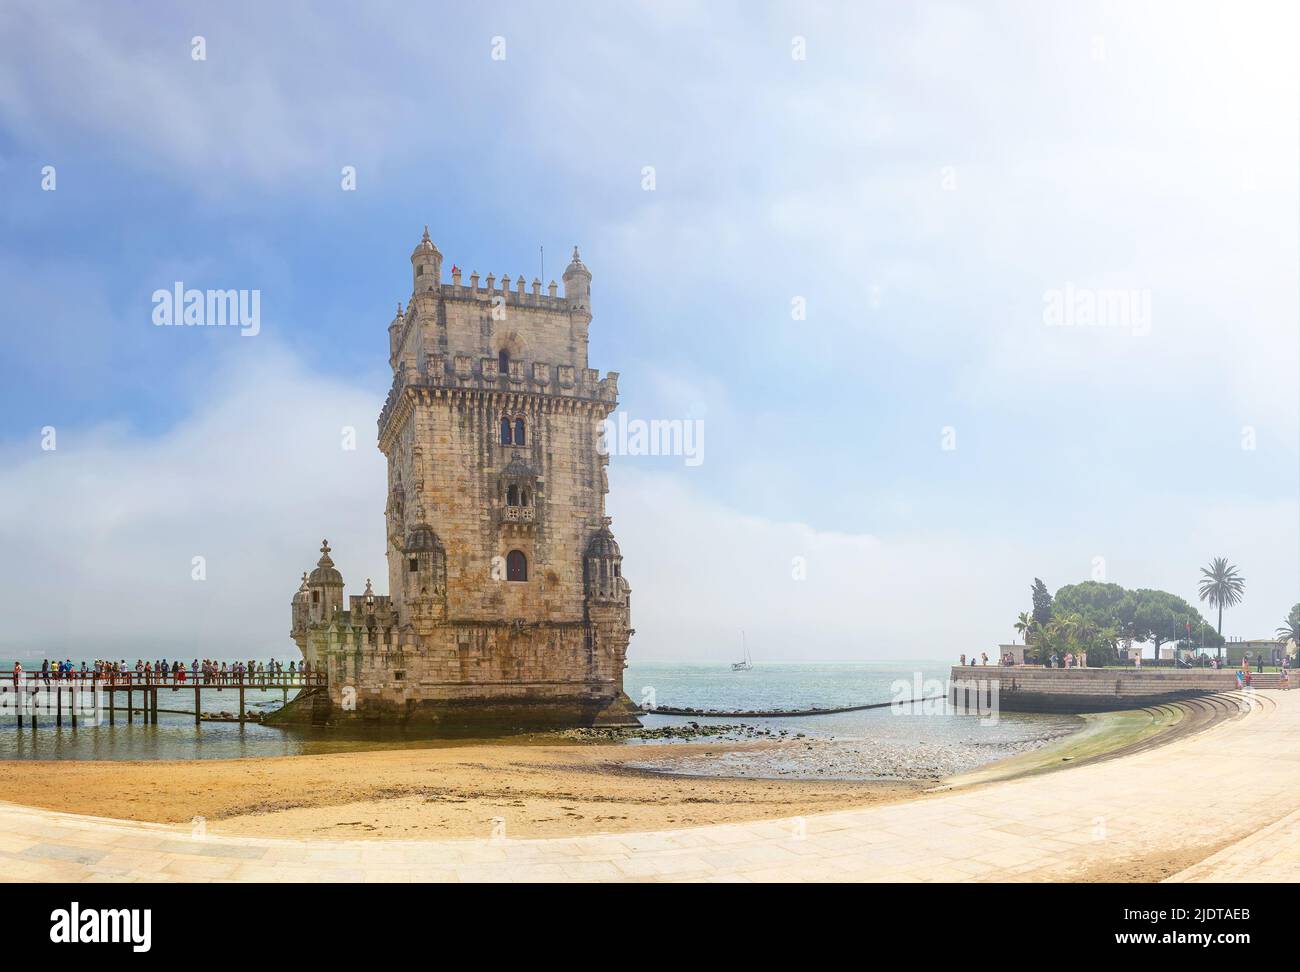 Belem Tower is a medieval castle fortification on the Tagus river. Today it is used as a museum. Belem, Lisbon, Portugal Stock Photo